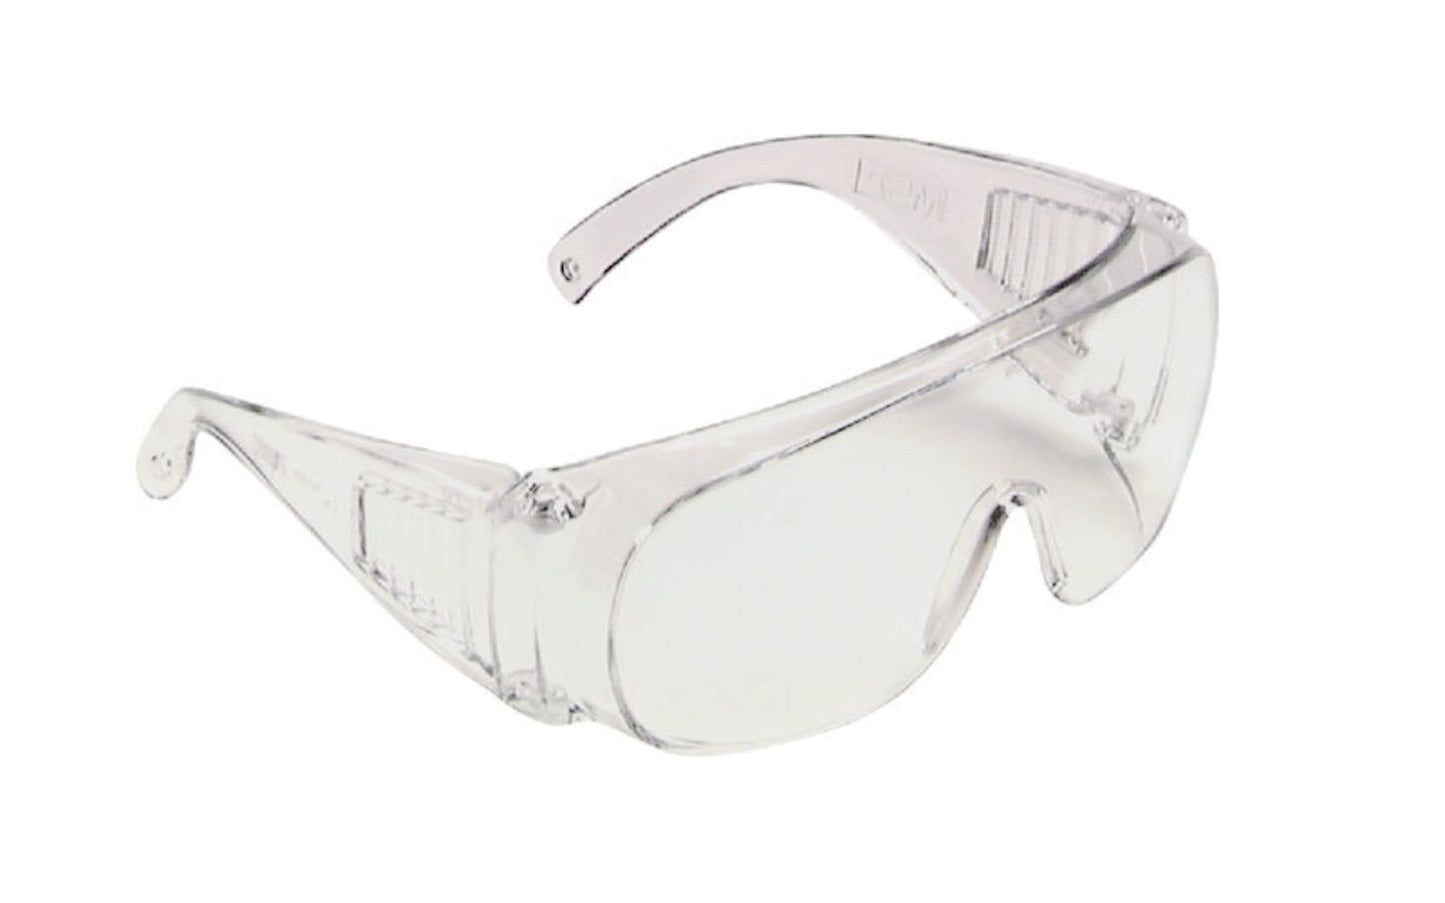 Safety Works Clear Safety Glasses. Cost-effective and durable safety glasses. Ideal to keep you safe on the job. Can be worn with or without prescription glasses. Fits over most prescription eyewear to protect your personal glasses from paint, scratching, and other damage while letting you see your work in sharp focus.